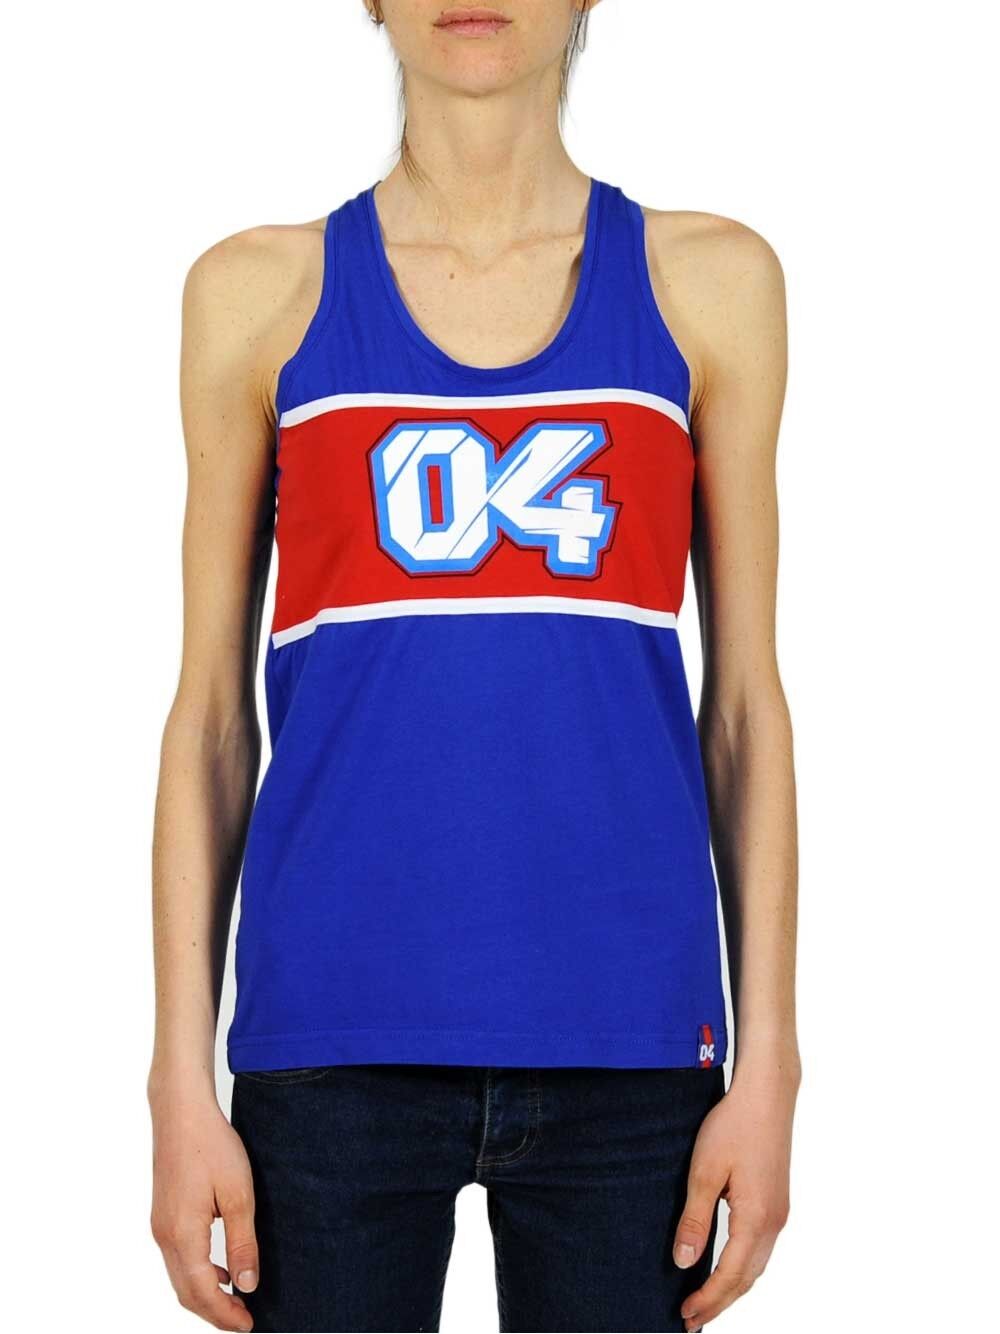 New Official Andrea Dovizioso Woman's Tank Top - 15 32203